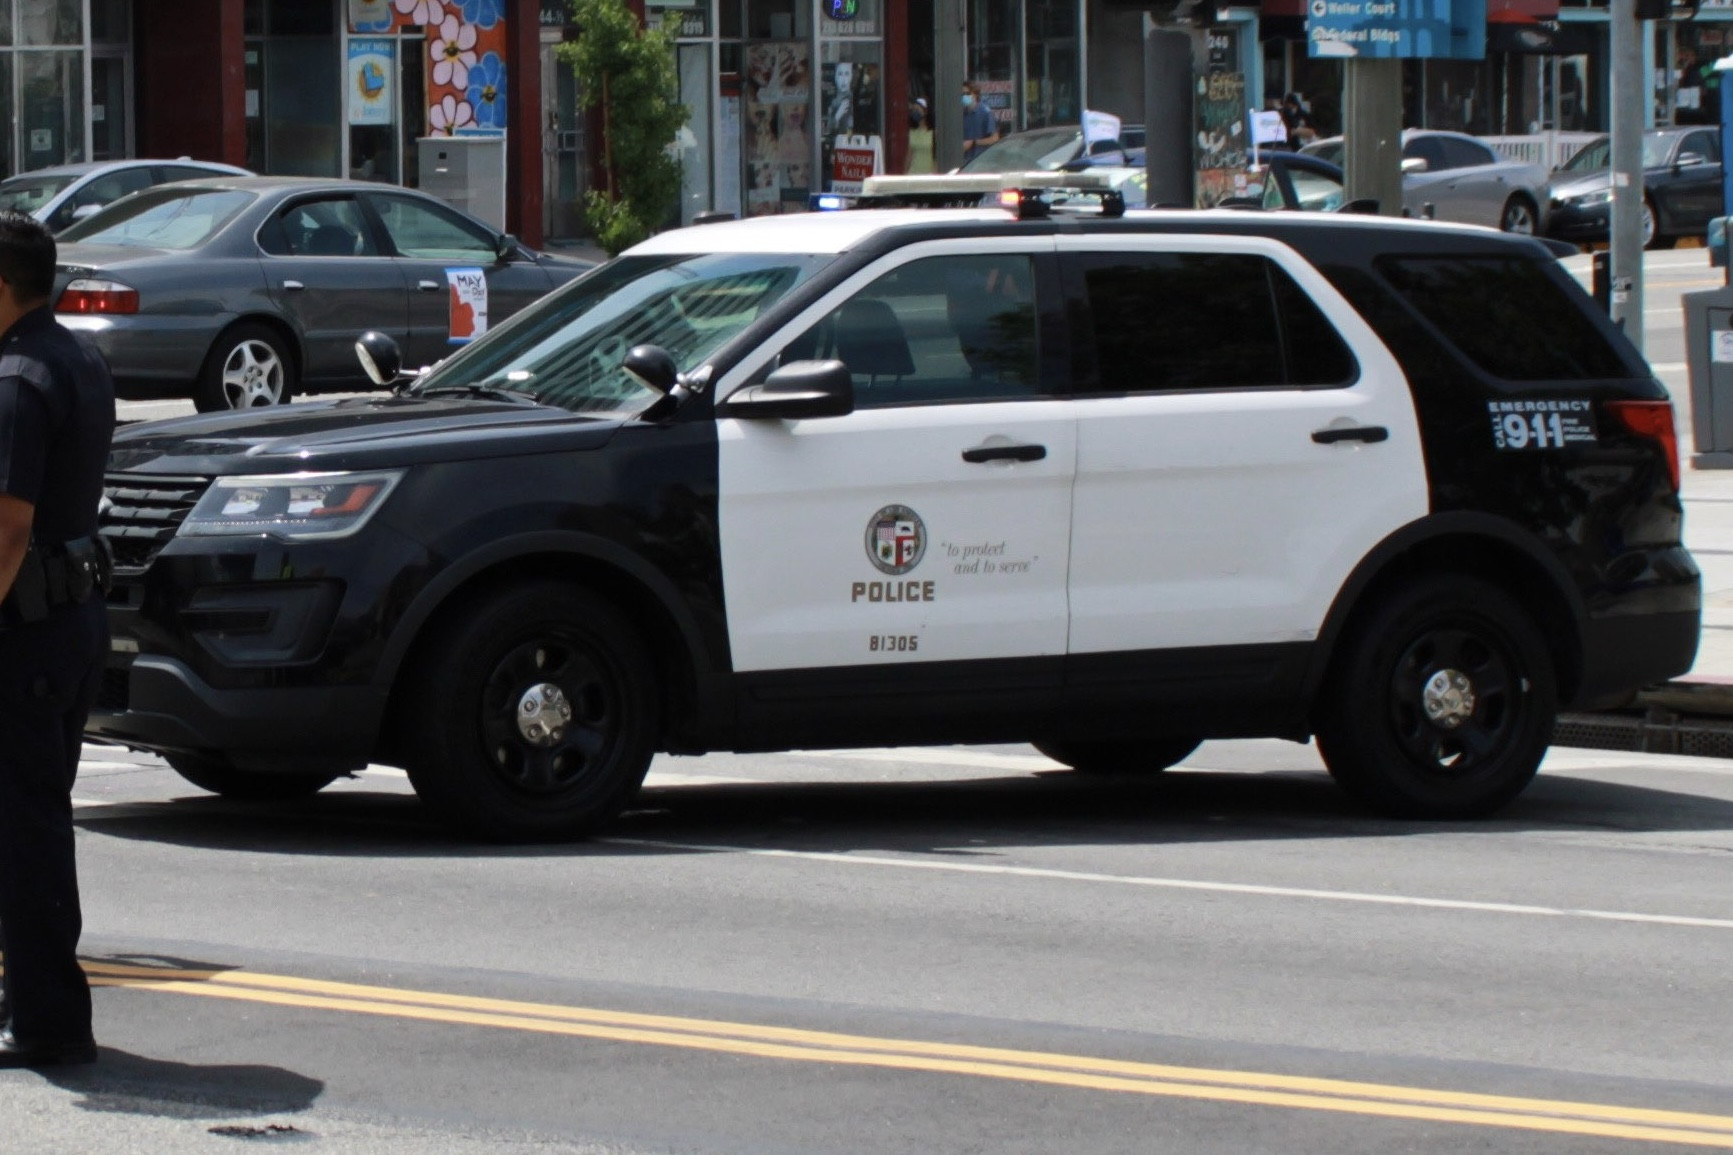 A photo  of Los Angeles Police
            Shop 81305, a 2016-2019 Ford Police Interceptor Utility             taken by @riemergencyvehicles